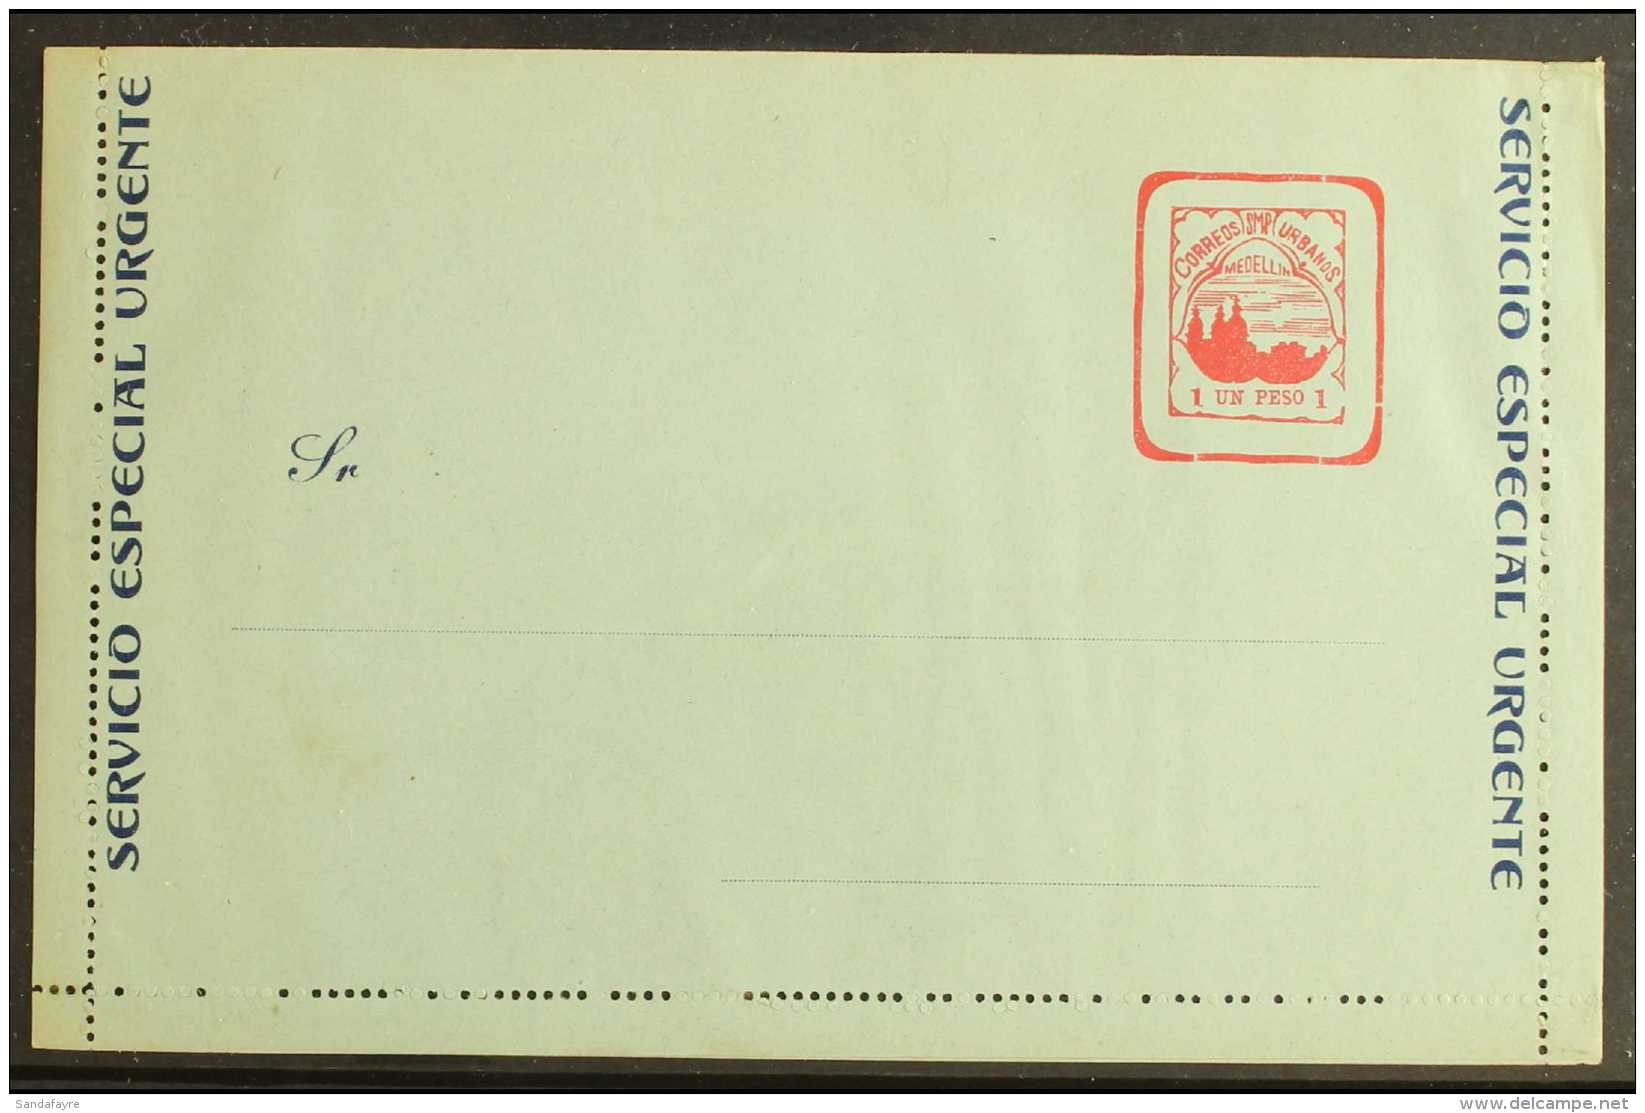 MEDELLIN - POSTAL STATIONERY 1904 Letter Card "Un Peso" Red On Light Green With Dark Blue Text, Higgins &amp; Gage... - Colombie